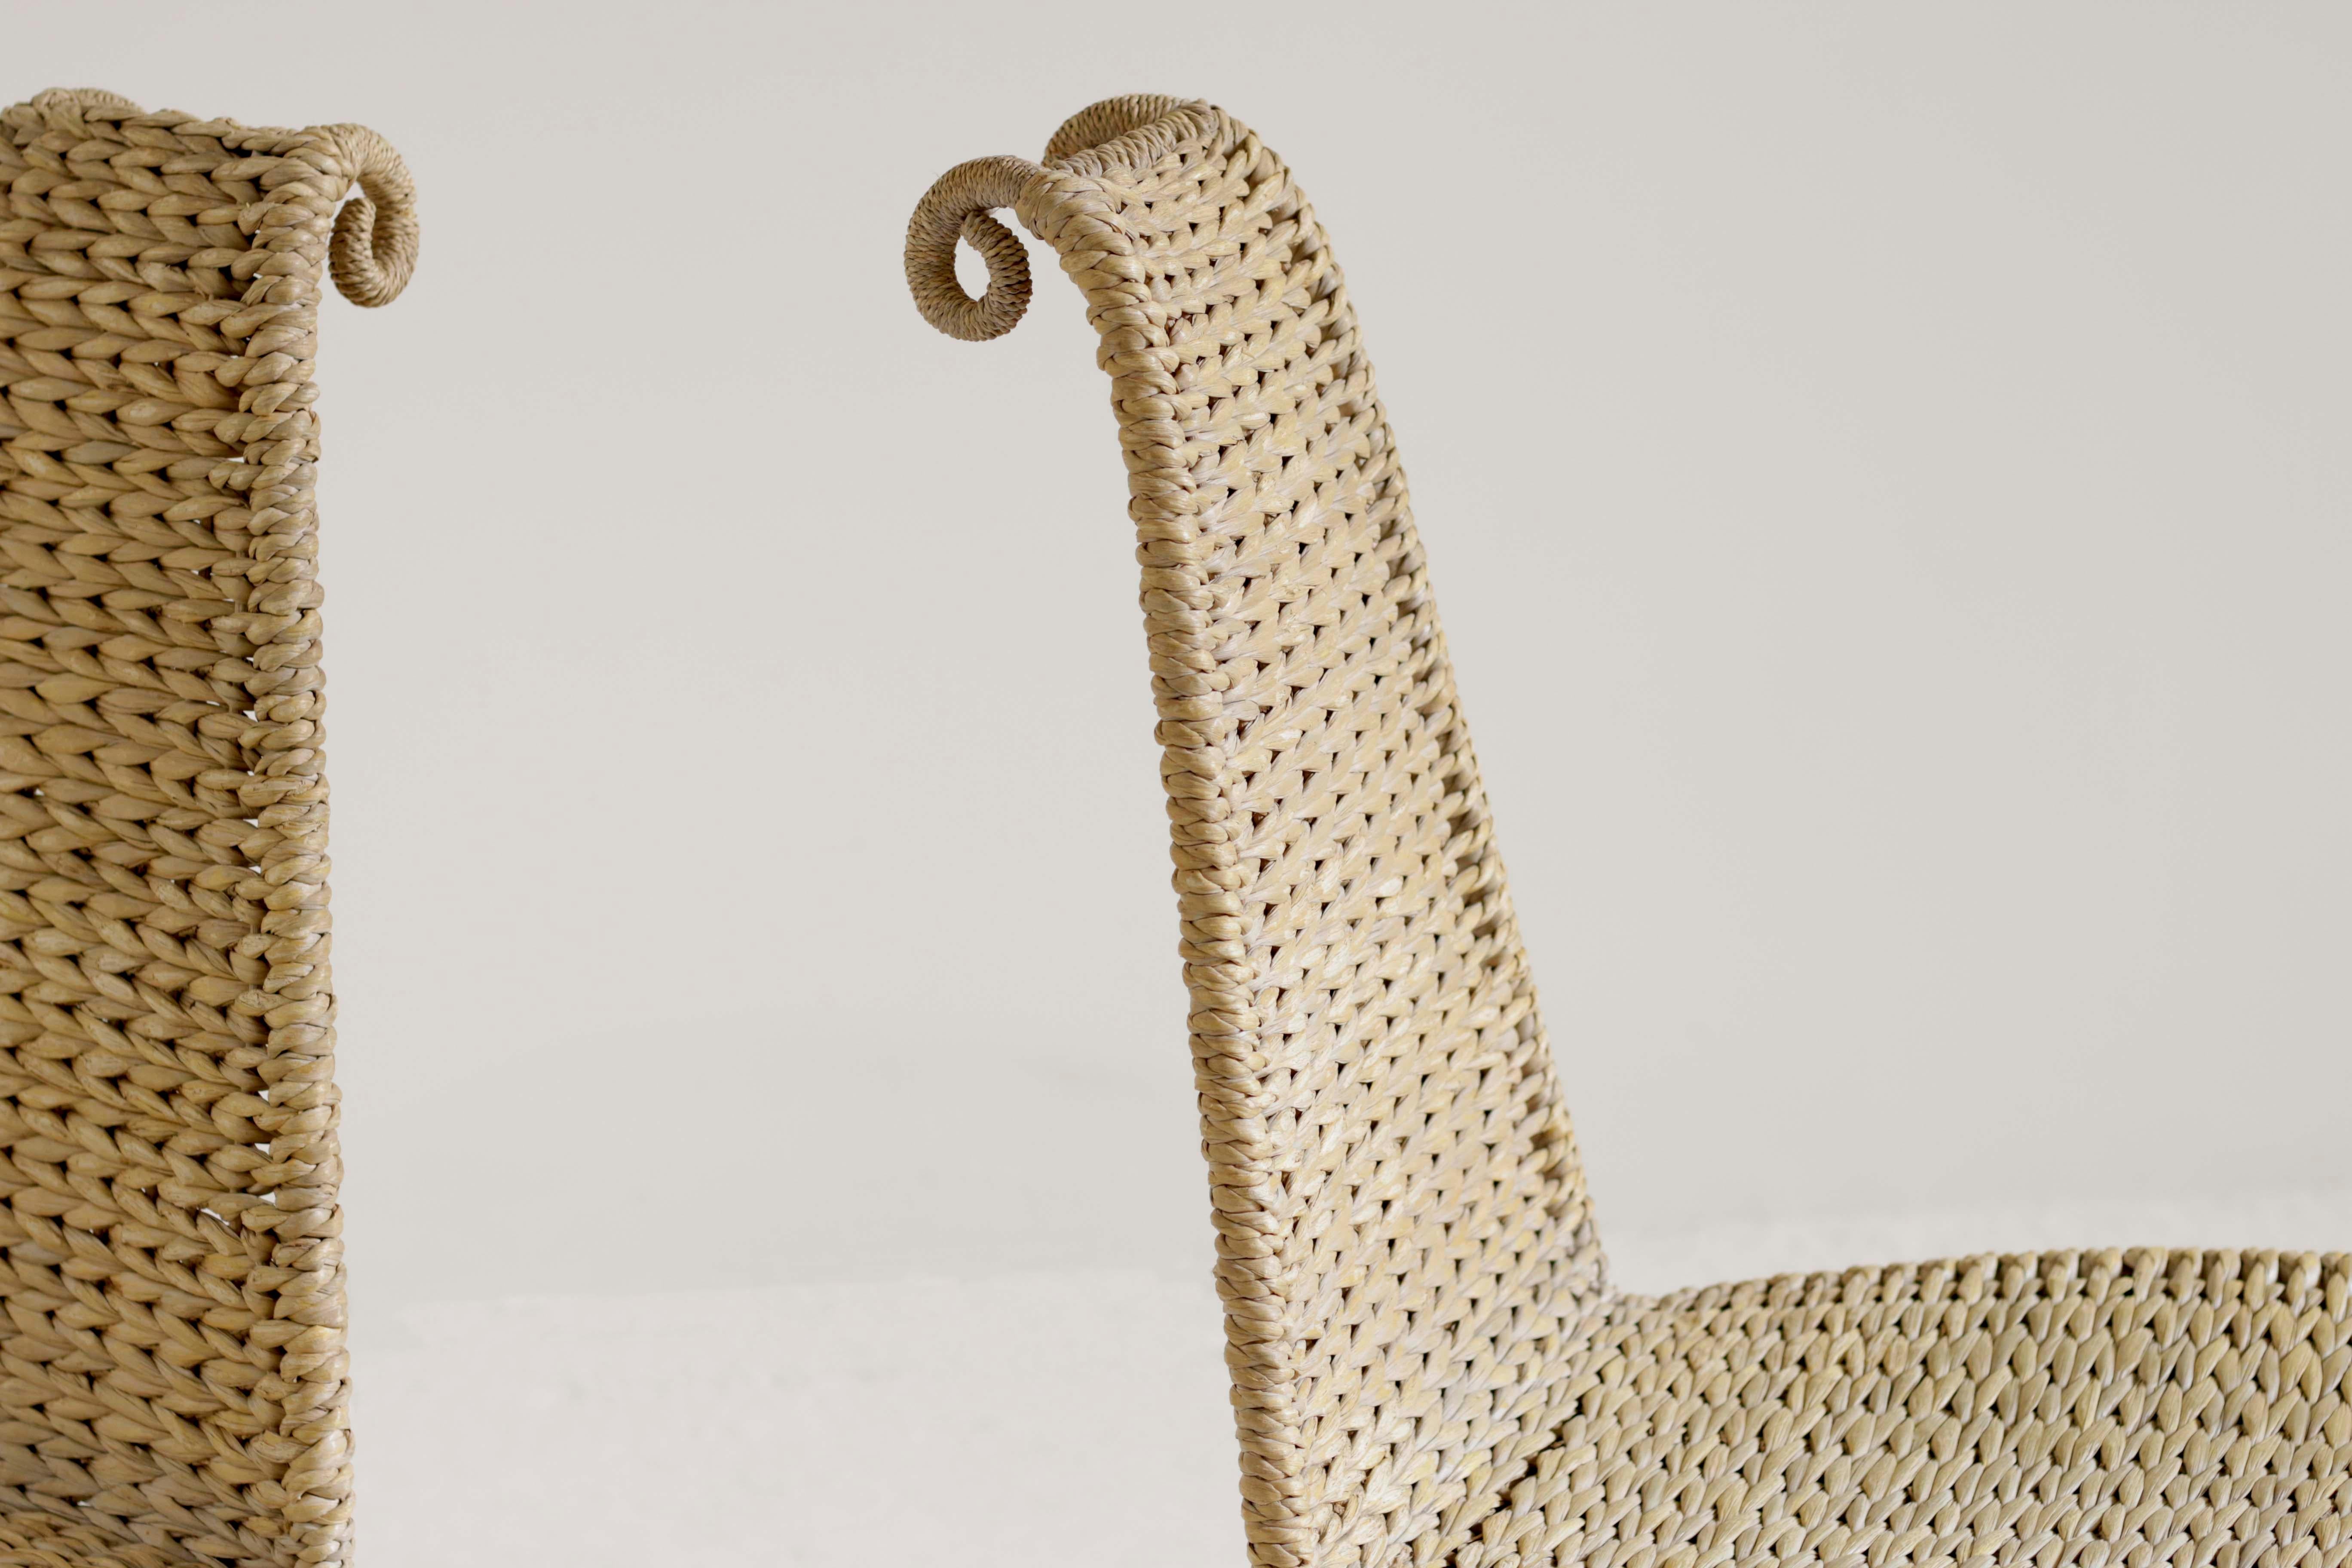 Post-Modern Set of 4 Conran Shop Woven Seagrass Chairs with Rams Horn Details